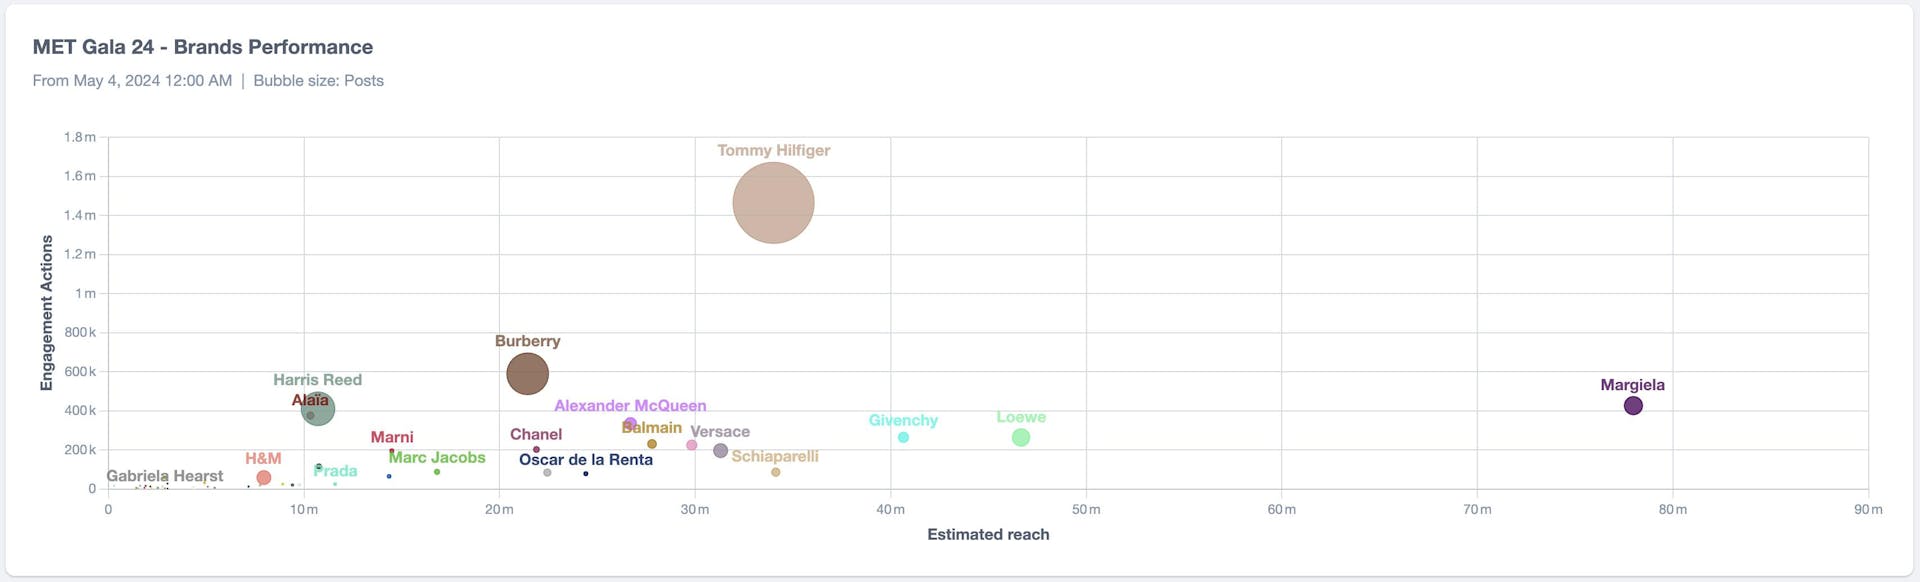 A bubble chart showing brand performance in terms of engagement and reach with Tommy Hilfiger scoring the highest engagement and Margiela scoring the furthest reach.